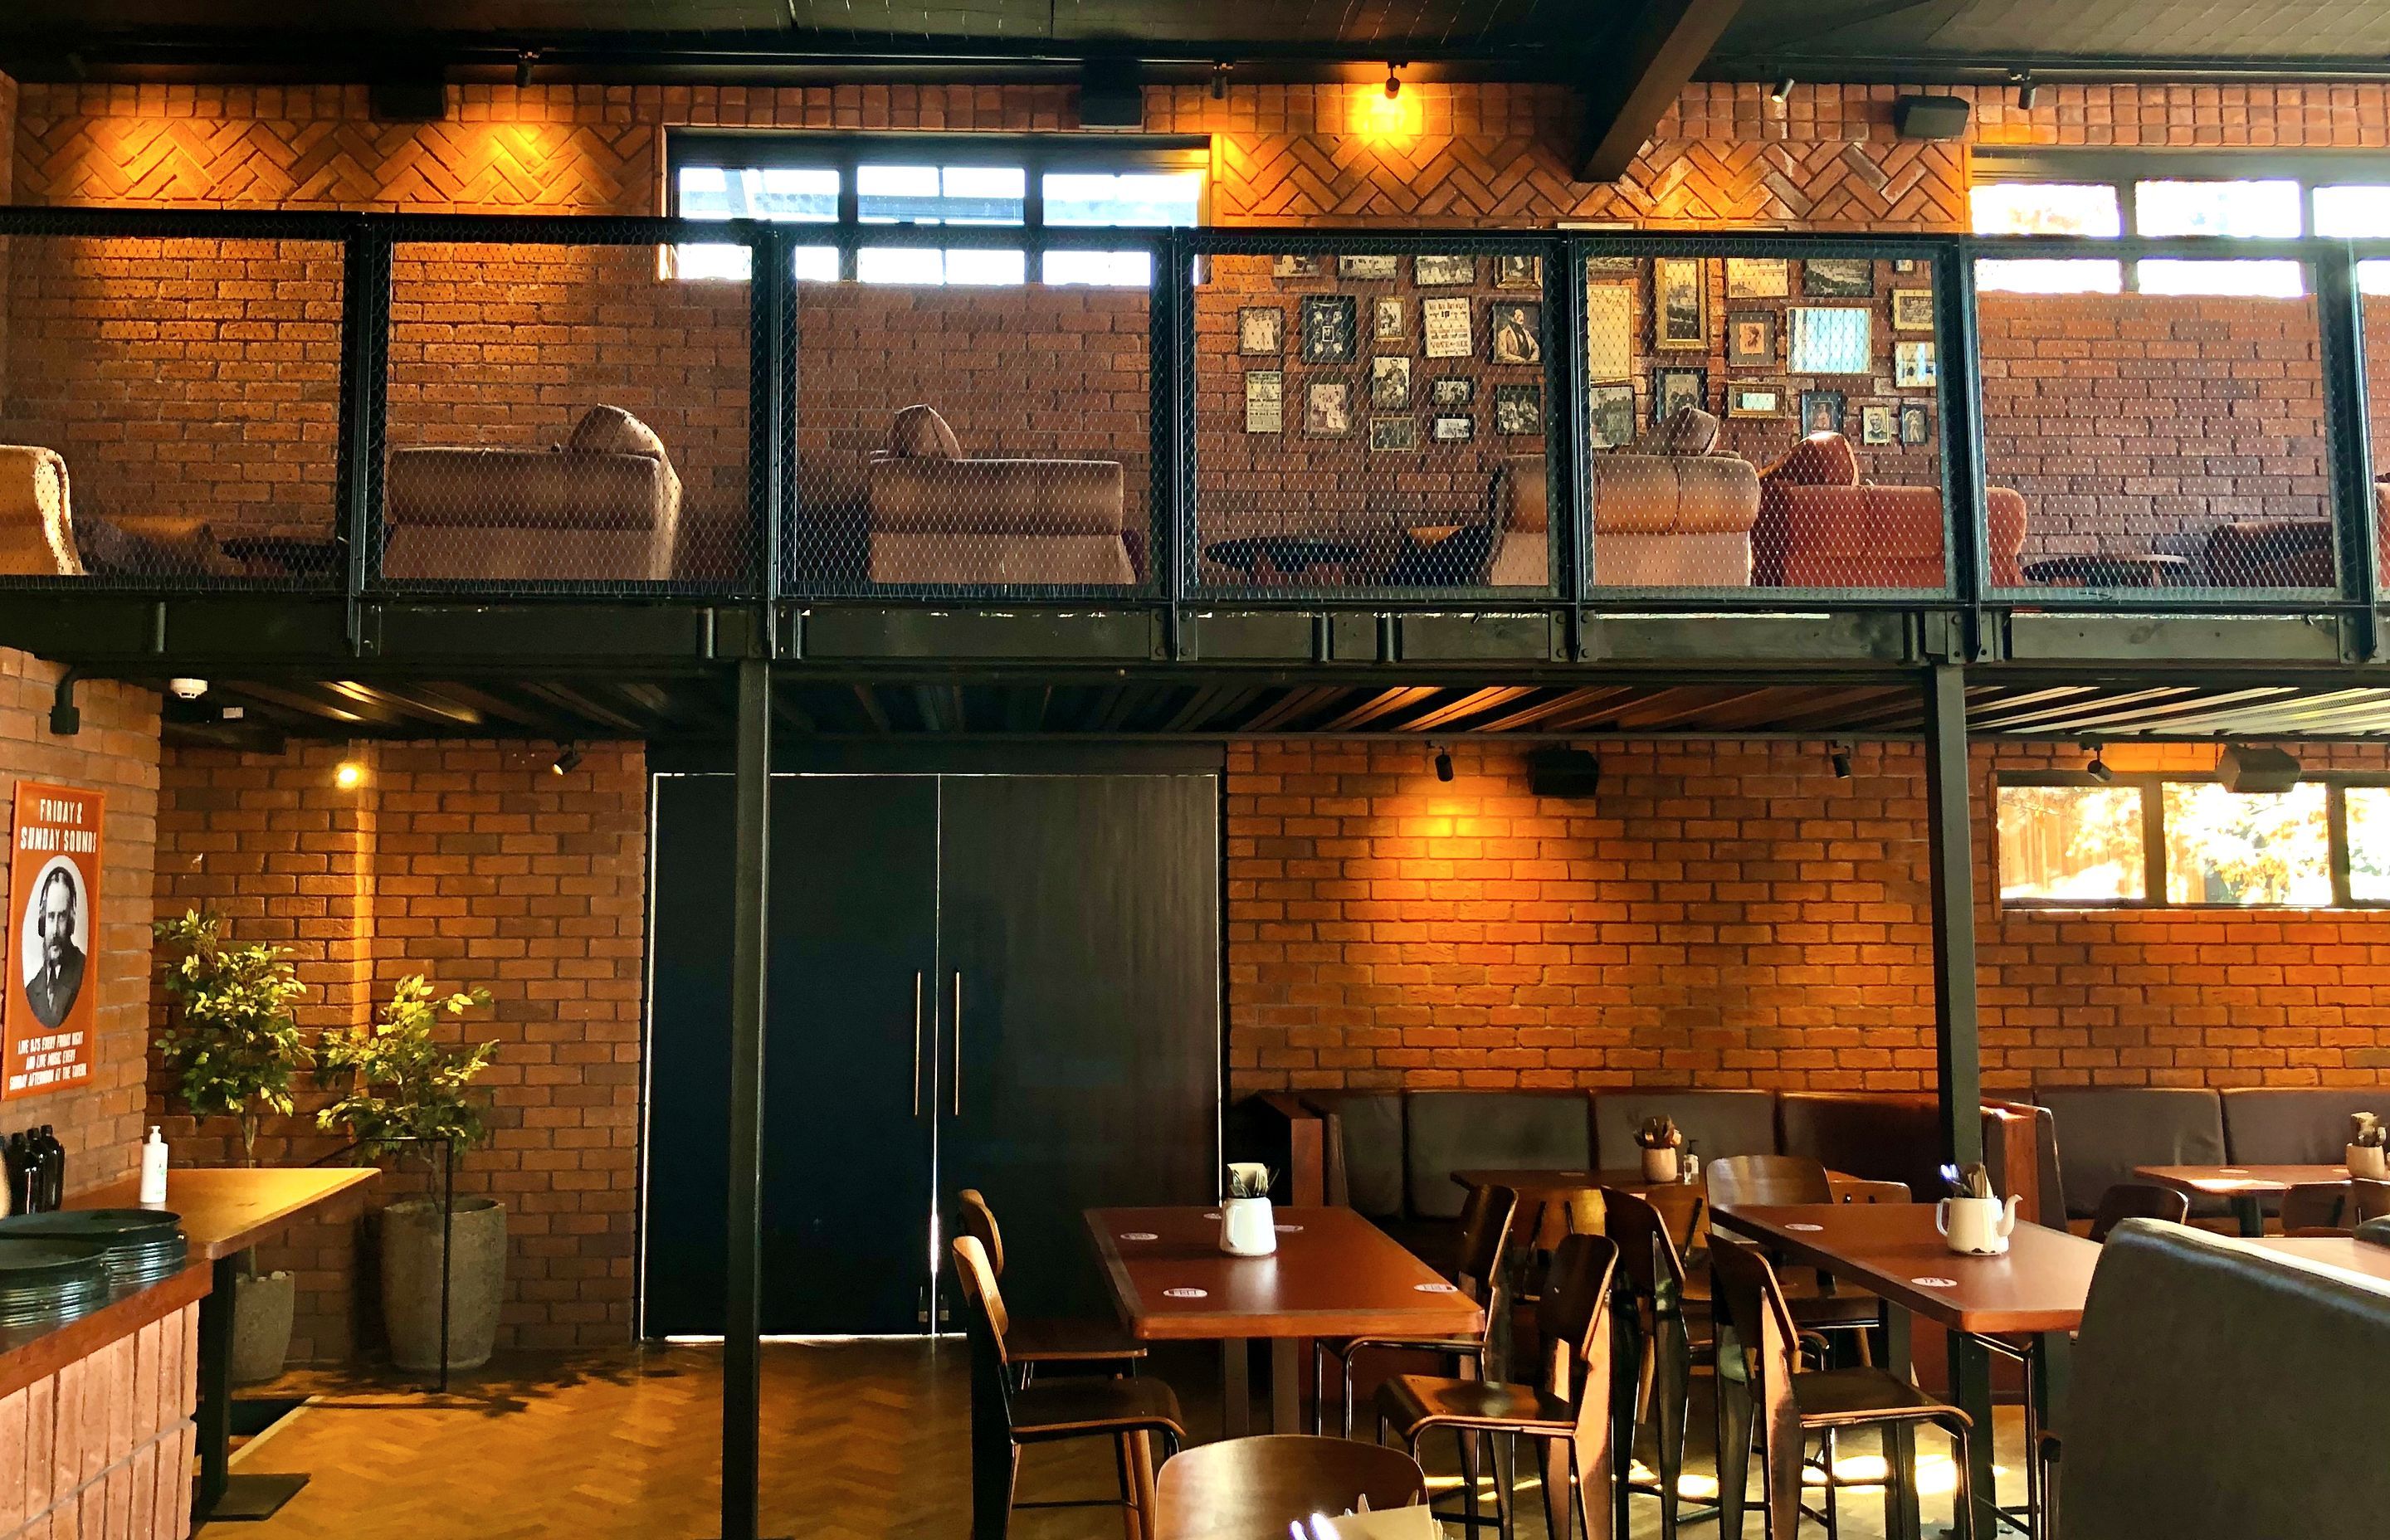 Morningside Tavern balustrades and mesh ceiling feature
